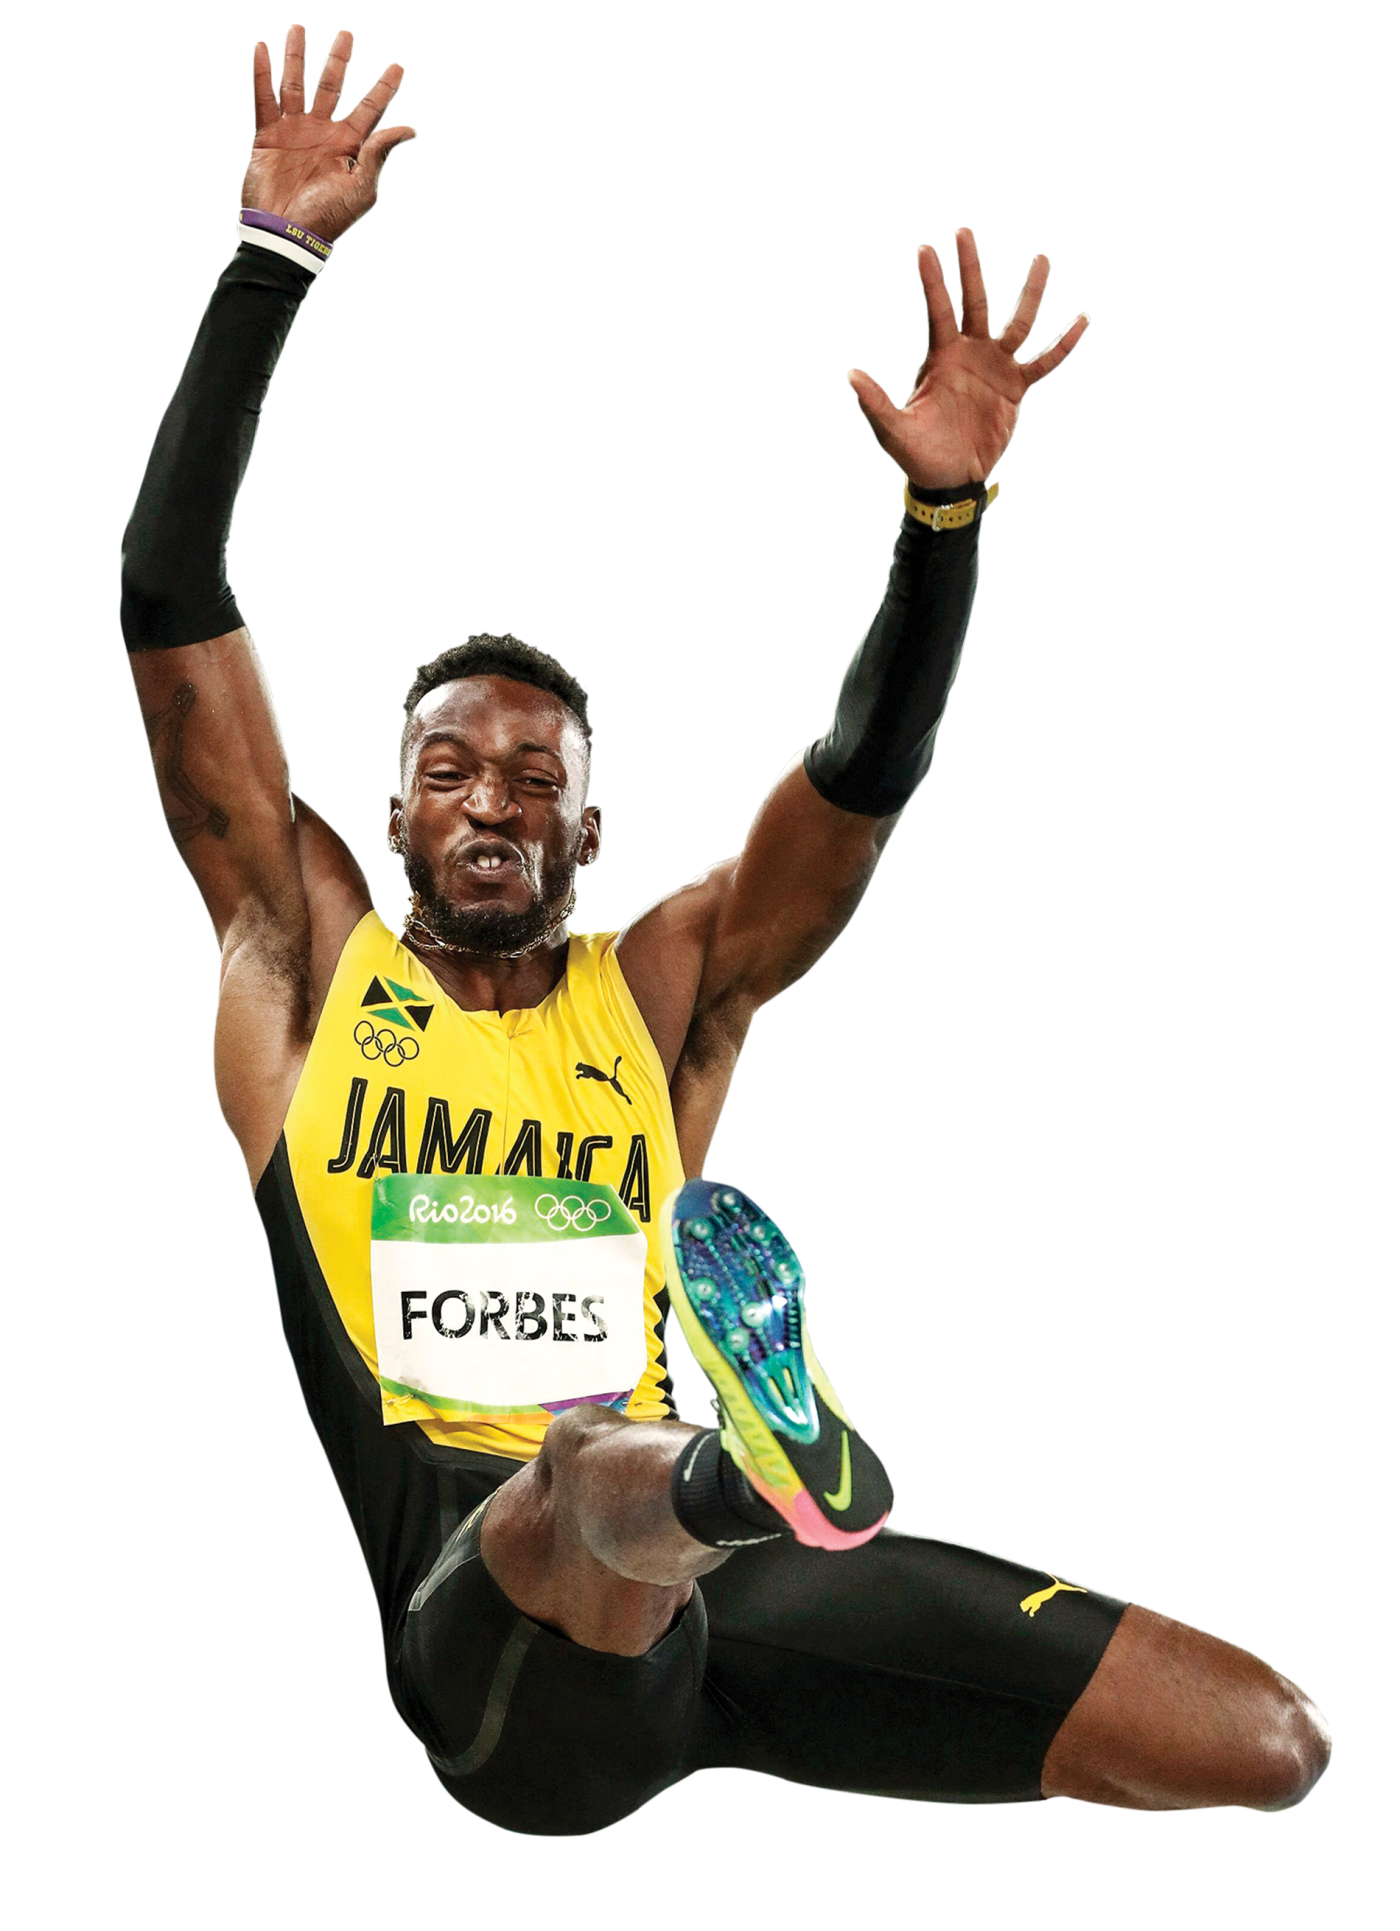 Image of Damar Forbes in flight: Rio Olympics, 2016